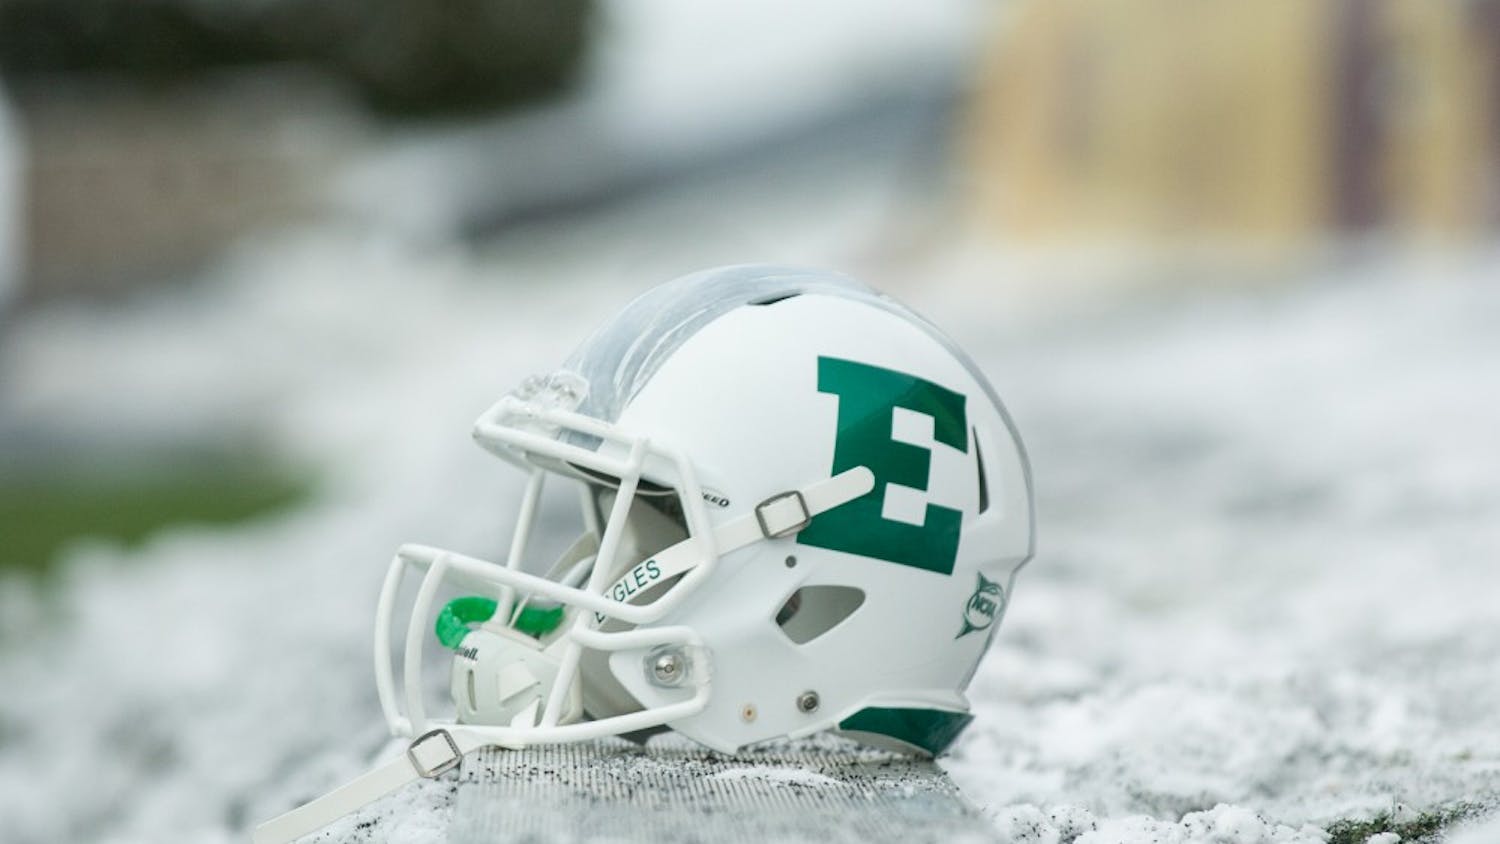 The field was coated in a thin layer of snow before EMU's game against CMU on 29 November in Mt. Pleasant.